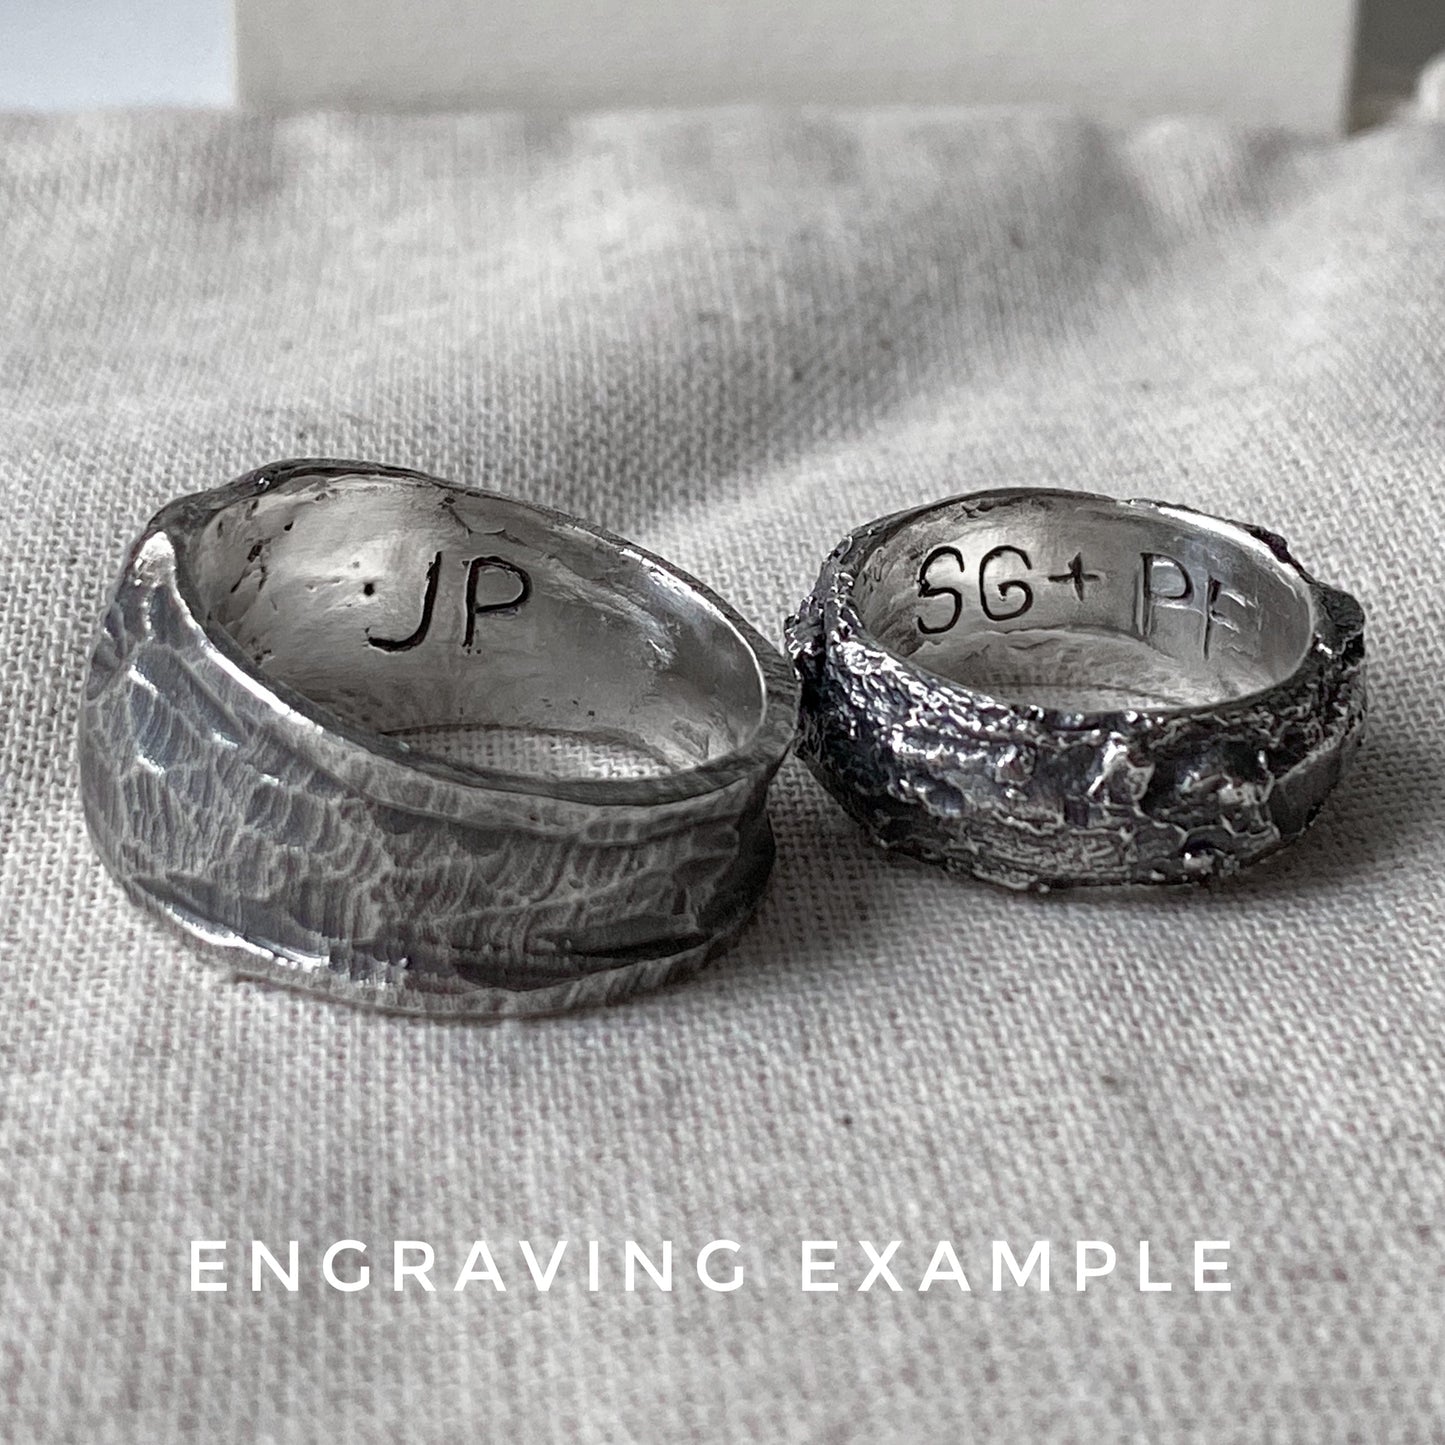 McQ ring- signet ring with light texture and skull imprint Signet rings Project50g 